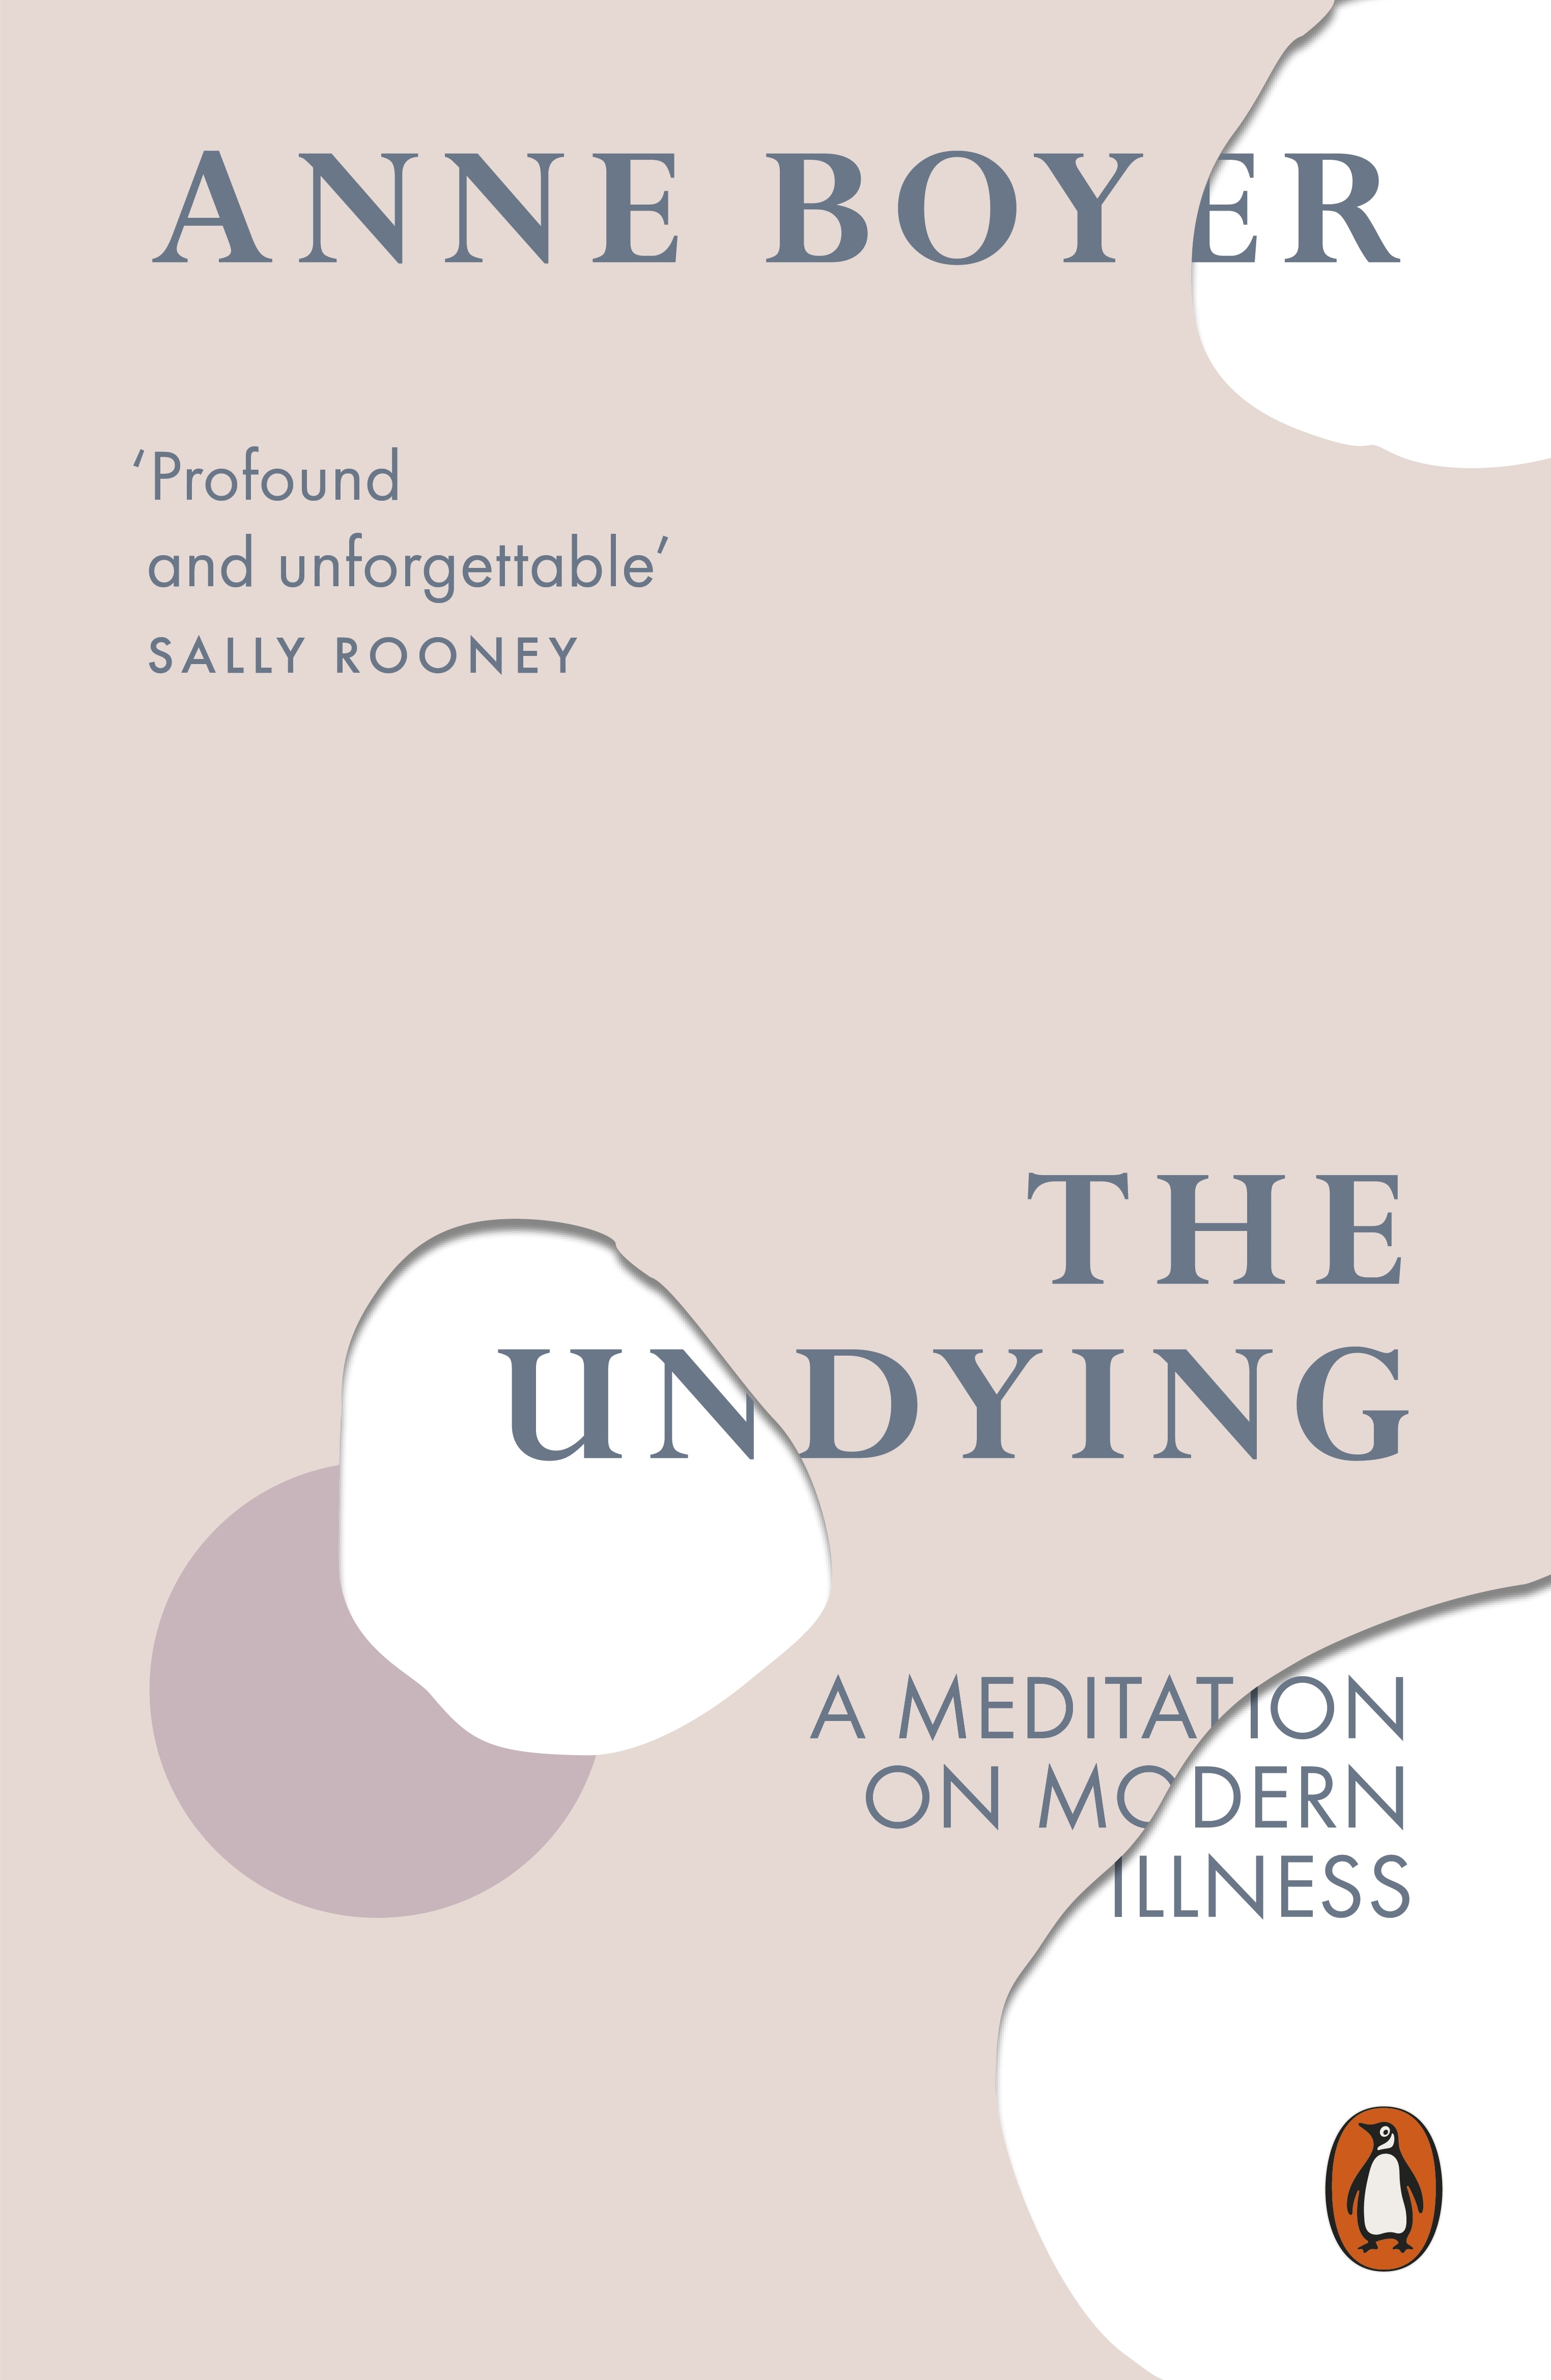 Book “The Undying” by Anne Boyer — September 8, 2020